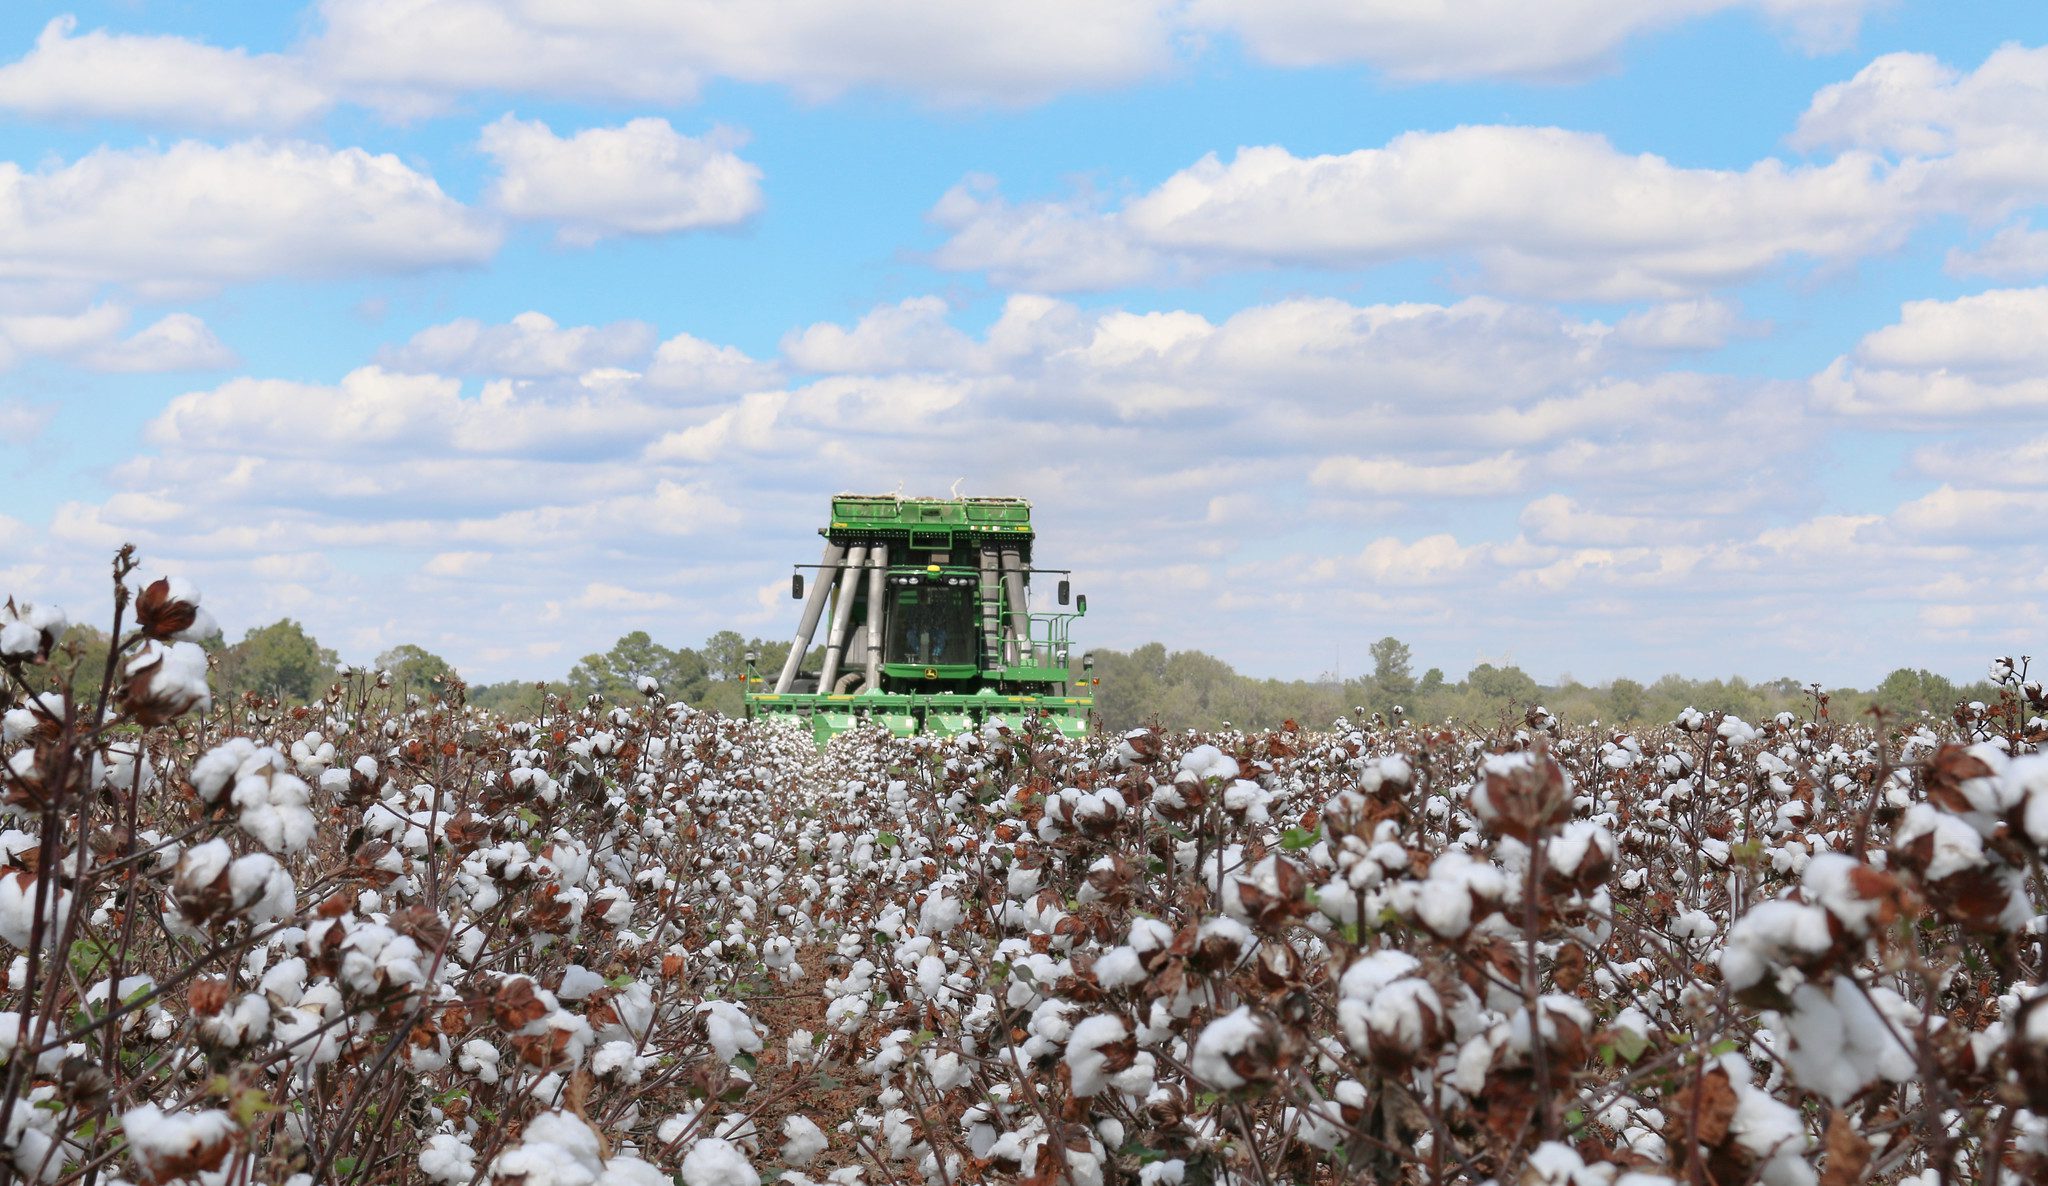 Cotton: A Sustainable Choice in Alabama's Climate - Alabama